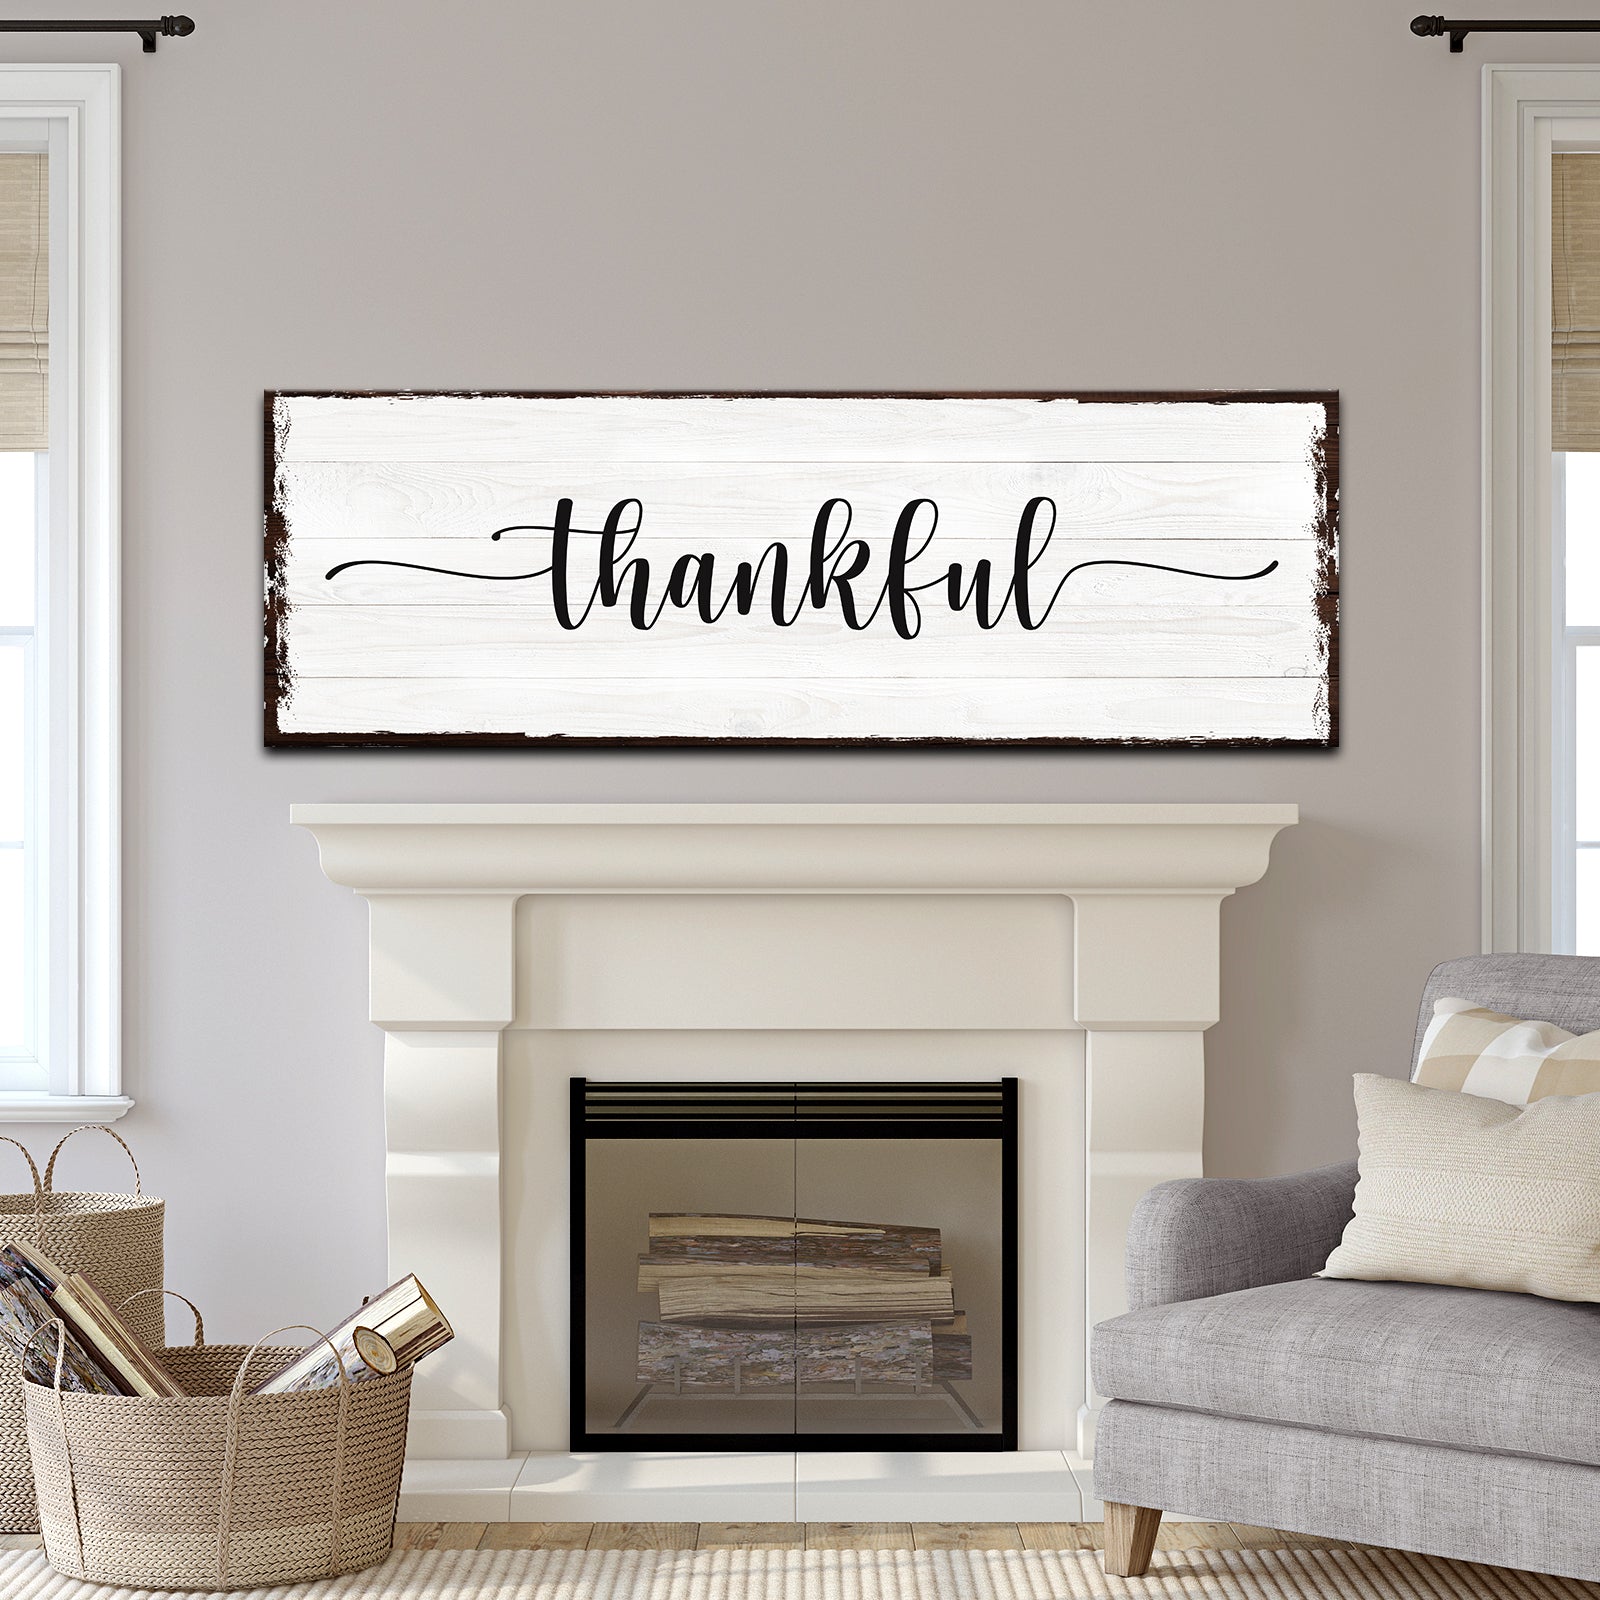 Thankful Sign - Image by Tailored Canvases